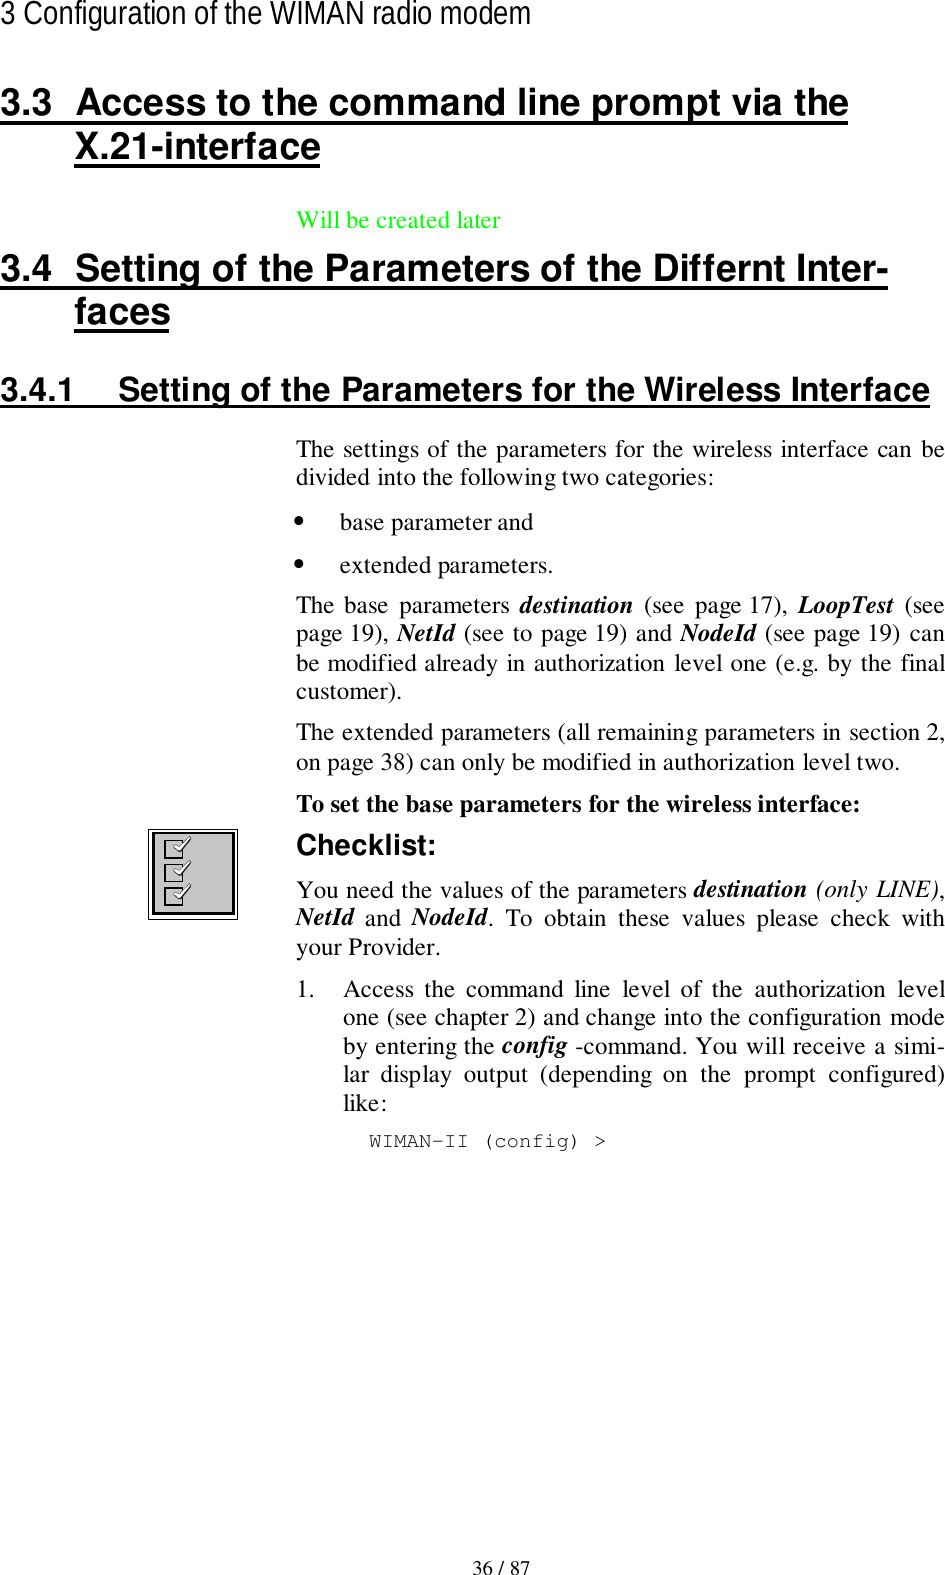 36 / 873 Configuration of the WIMAN radio modem3.3  Access to the command line prompt via theX.21-interfaceWill be created later3.4  Setting of the Parameters of the Differnt Inter-faces3.4.1  Setting of the Parameters for the Wireless InterfaceThe settings of the parameters for the wireless interface can bedivided into the following two categories:• base parameter and• extended parameters.The base parameters destination (see page 17), LoopTest  (seepage 19), NetId (see to page 19) and NodeId (see page 19) canbe modified already in authorization level one (e.g. by the finalcustomer).The extended parameters (all remaining parameters in section 2,on page 38) can only be modified in authorization level two.To set the base parameters for the wireless interface:Checklist:You need the values of the parameters destination (only LINE),NetId  and  NodeId. To obtain these values please check withyour Provider.1. Access the command line level of the authorization levelone (see chapter 2) and change into the configuration modeby entering the config -command. You will receive a simi-lar display output (depending on the prompt configured)like:WIMAN-II (config) &gt;